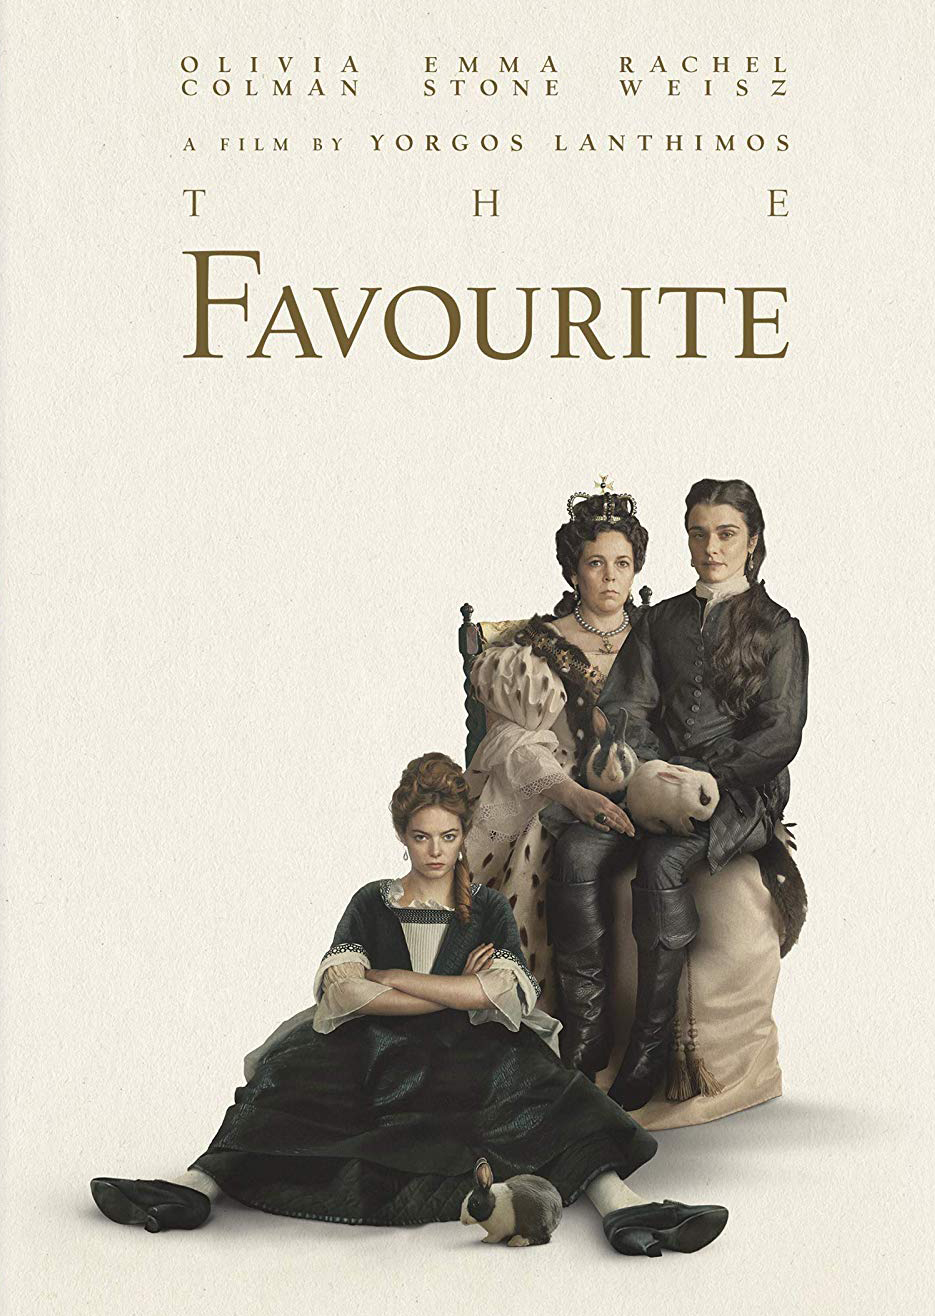 The favourite